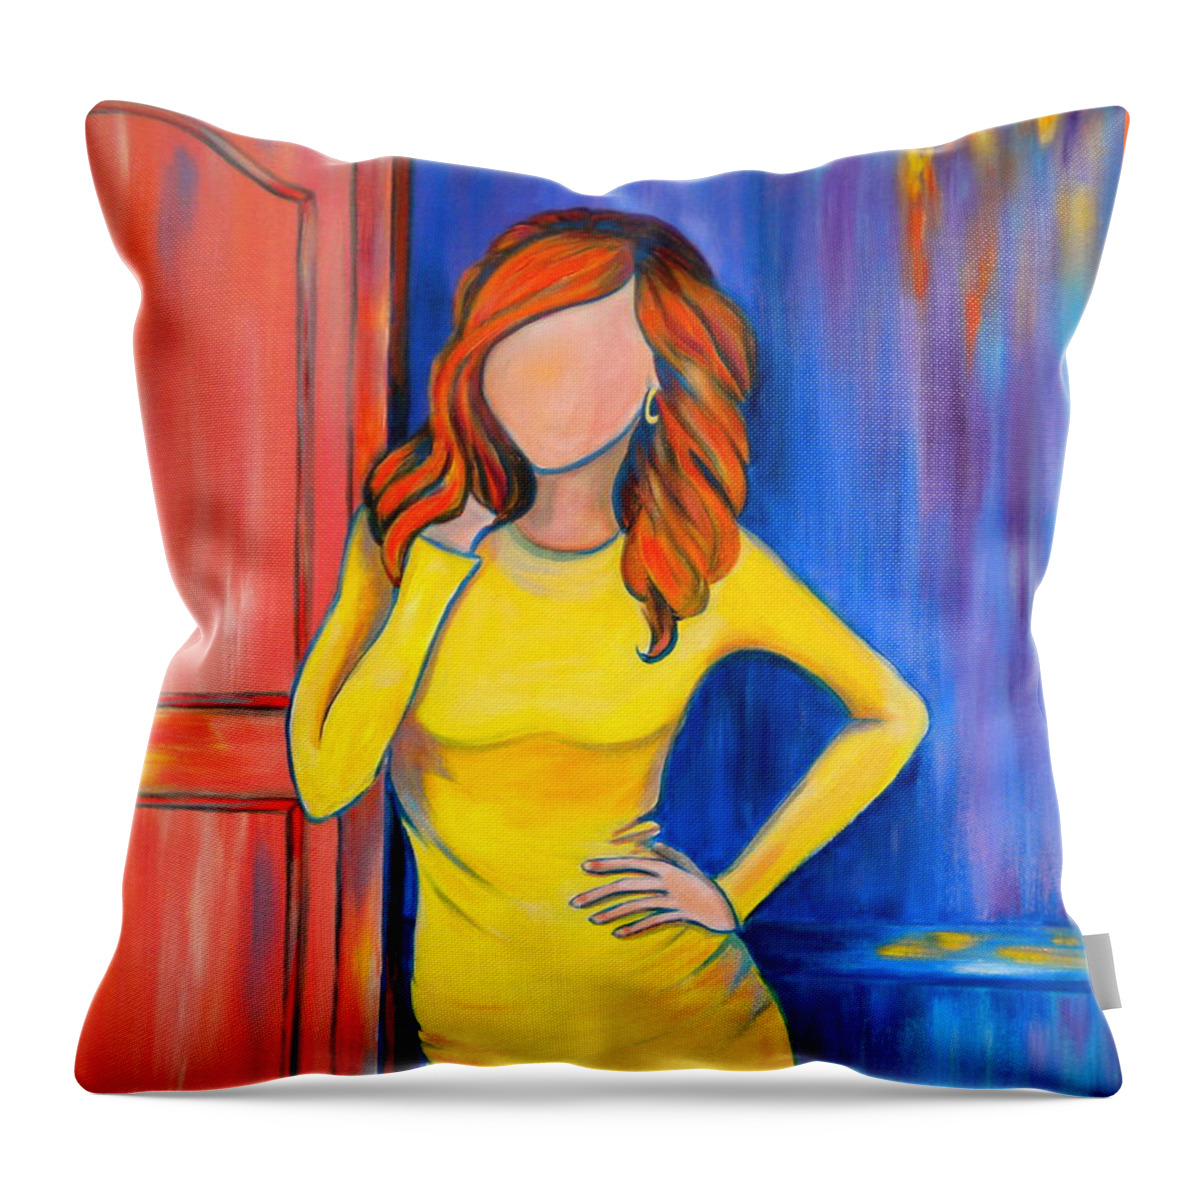 Southern Throw Pillow featuring the painting Southern Hospitality by Debi Starr